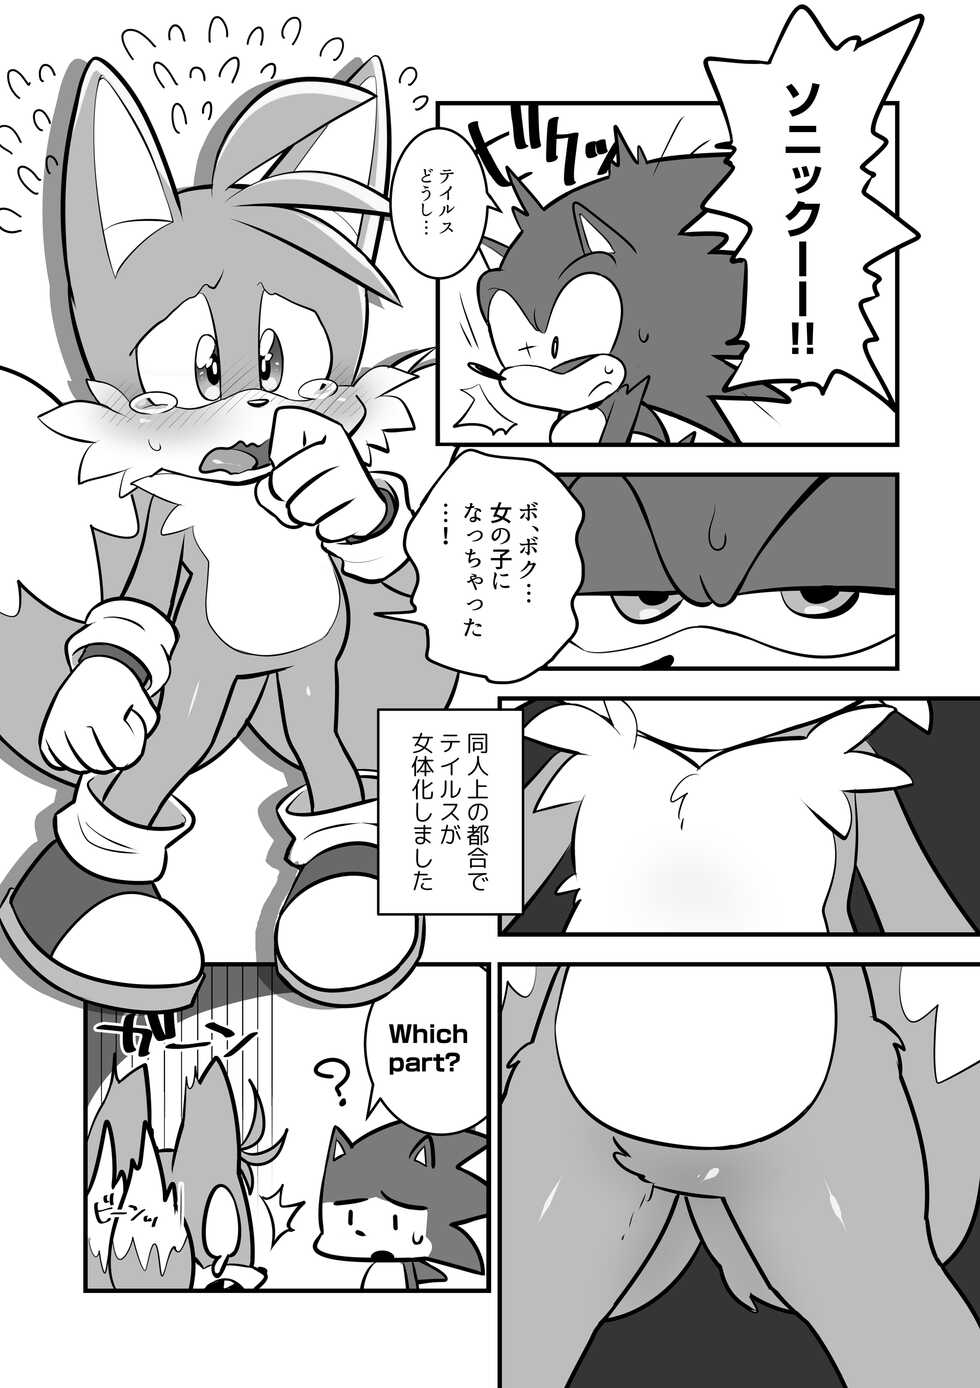 [hentaib] Tails and Sonic's special Fuss (Sonic the Hedgehog) - Page 2